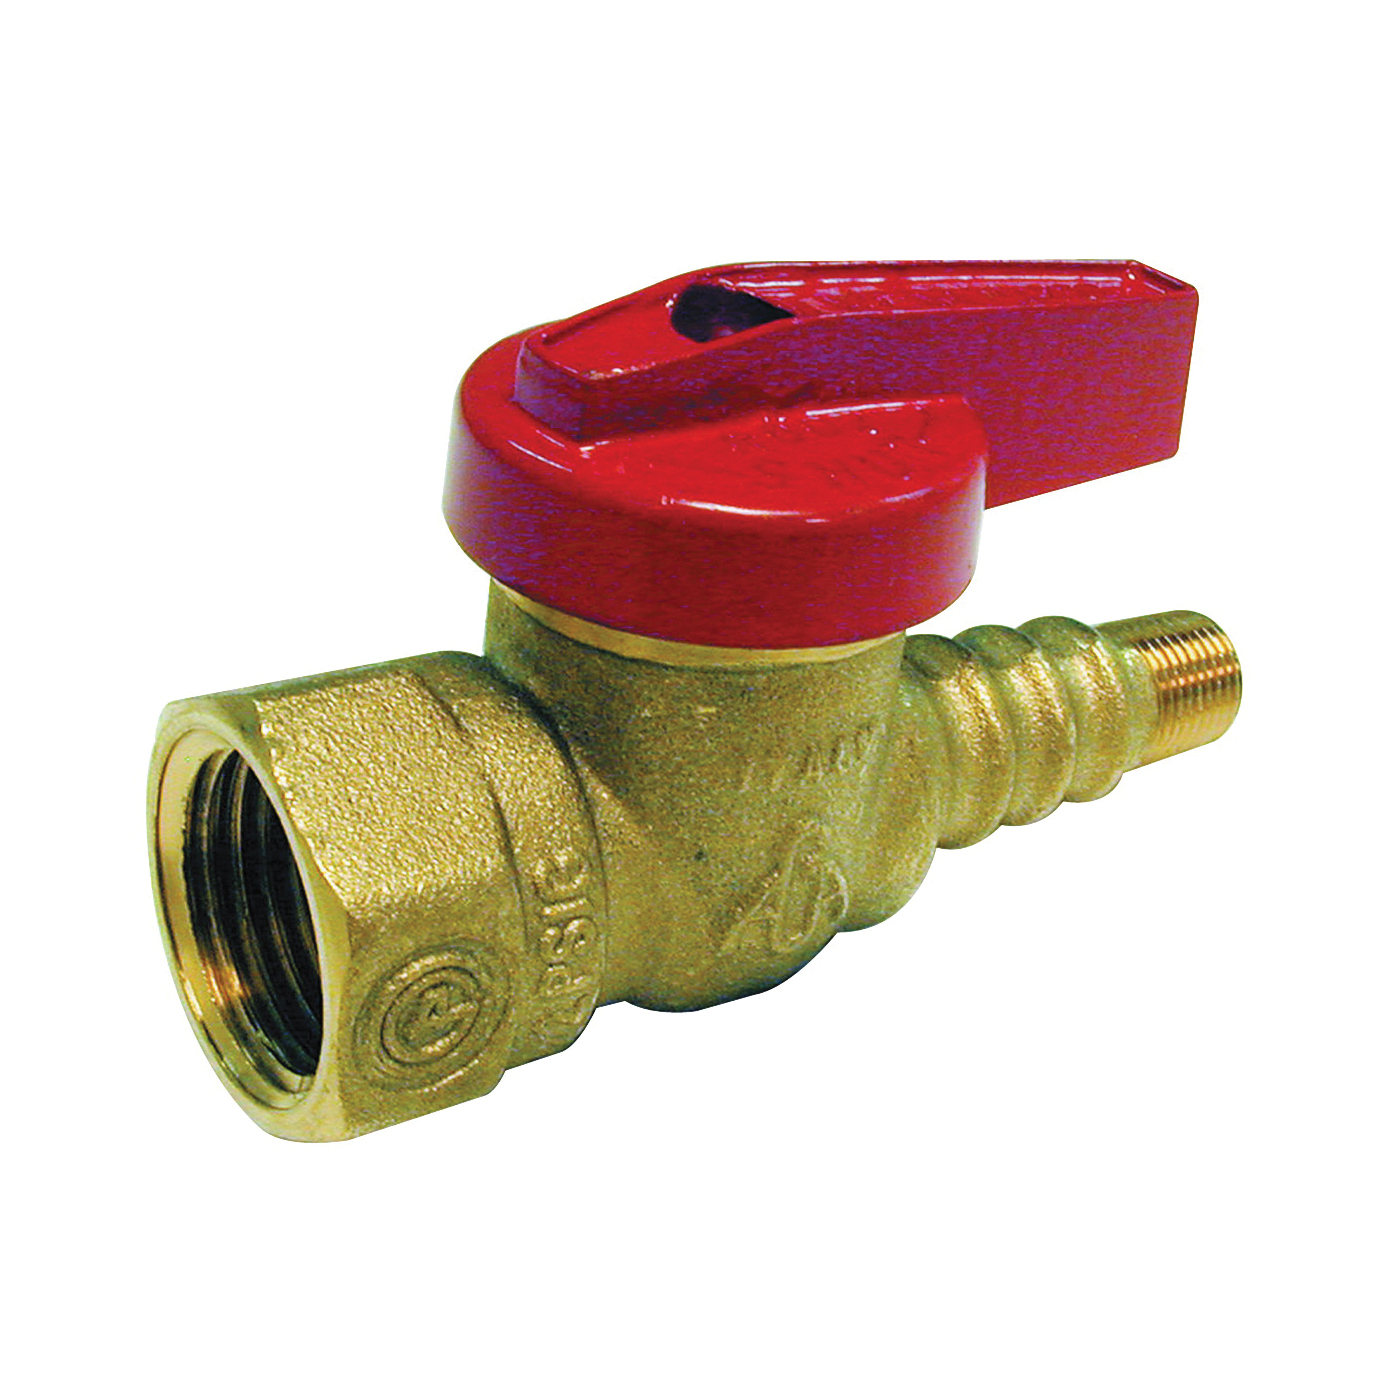 115-503 Gas Ball Valve, 1/2 in Connection, FPT x TX Pattern, 200 psi Pressure, Manual Actuator, Brass Body, Chrome